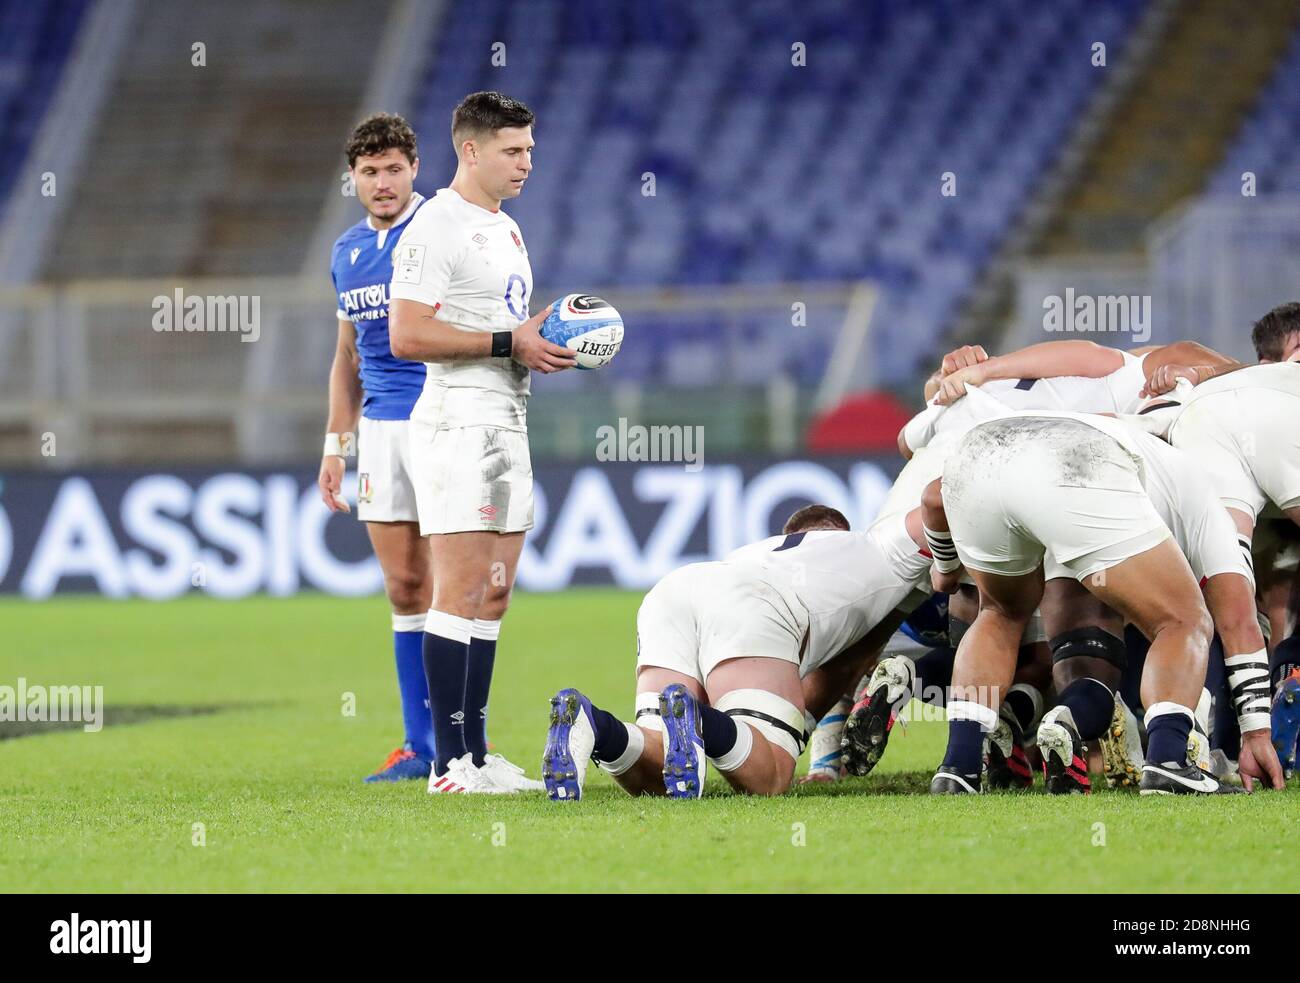 Rome, Italy. 31st Oct, 2020. rome, Italy, Stadio Olimpico, 31 Oct 2020, Ben Youngs (England) during Italy vs England - Rugby Six Nations match - Credit: LM/Luigi Mariani Credit: Luigi Mariani/LPS/ZUMA Wire/Alamy Live News Stock Photo